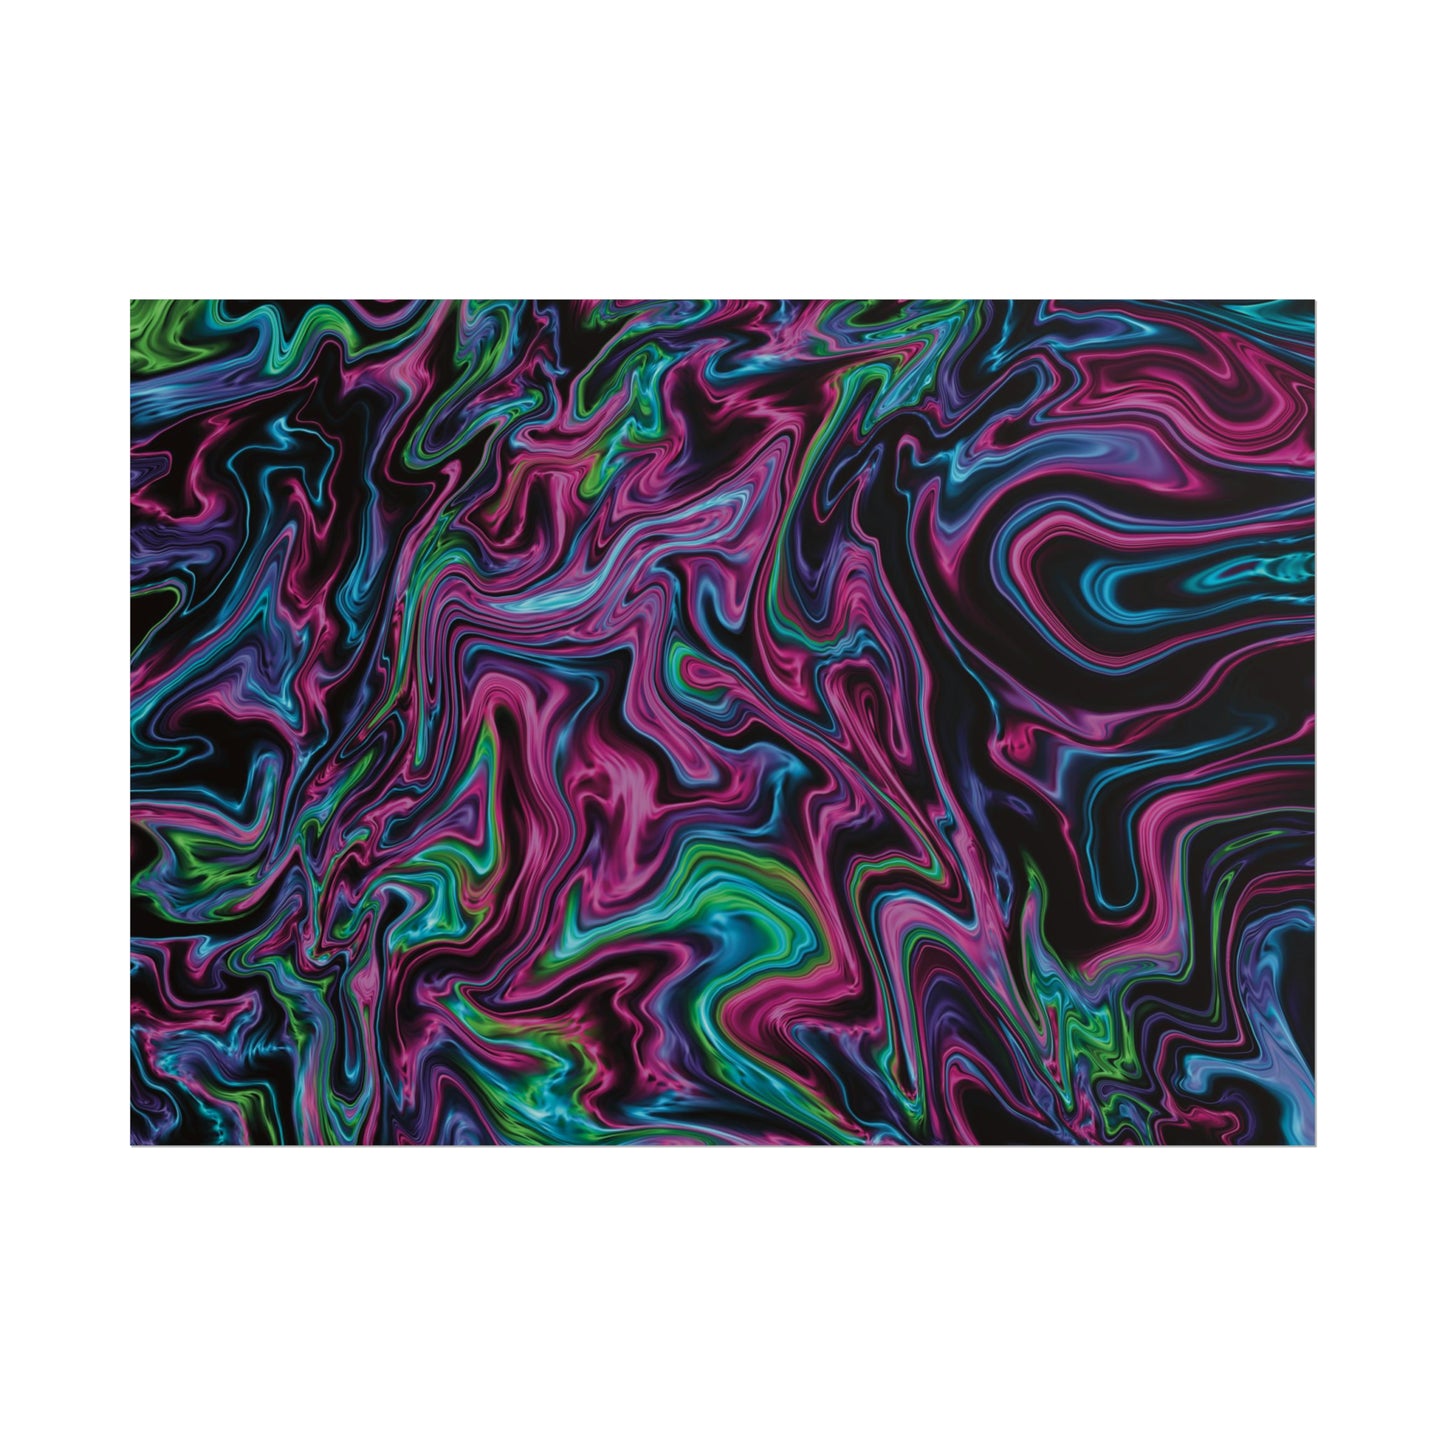 Galactic Soul Family Connection Print- Fluid Painting on Black Background